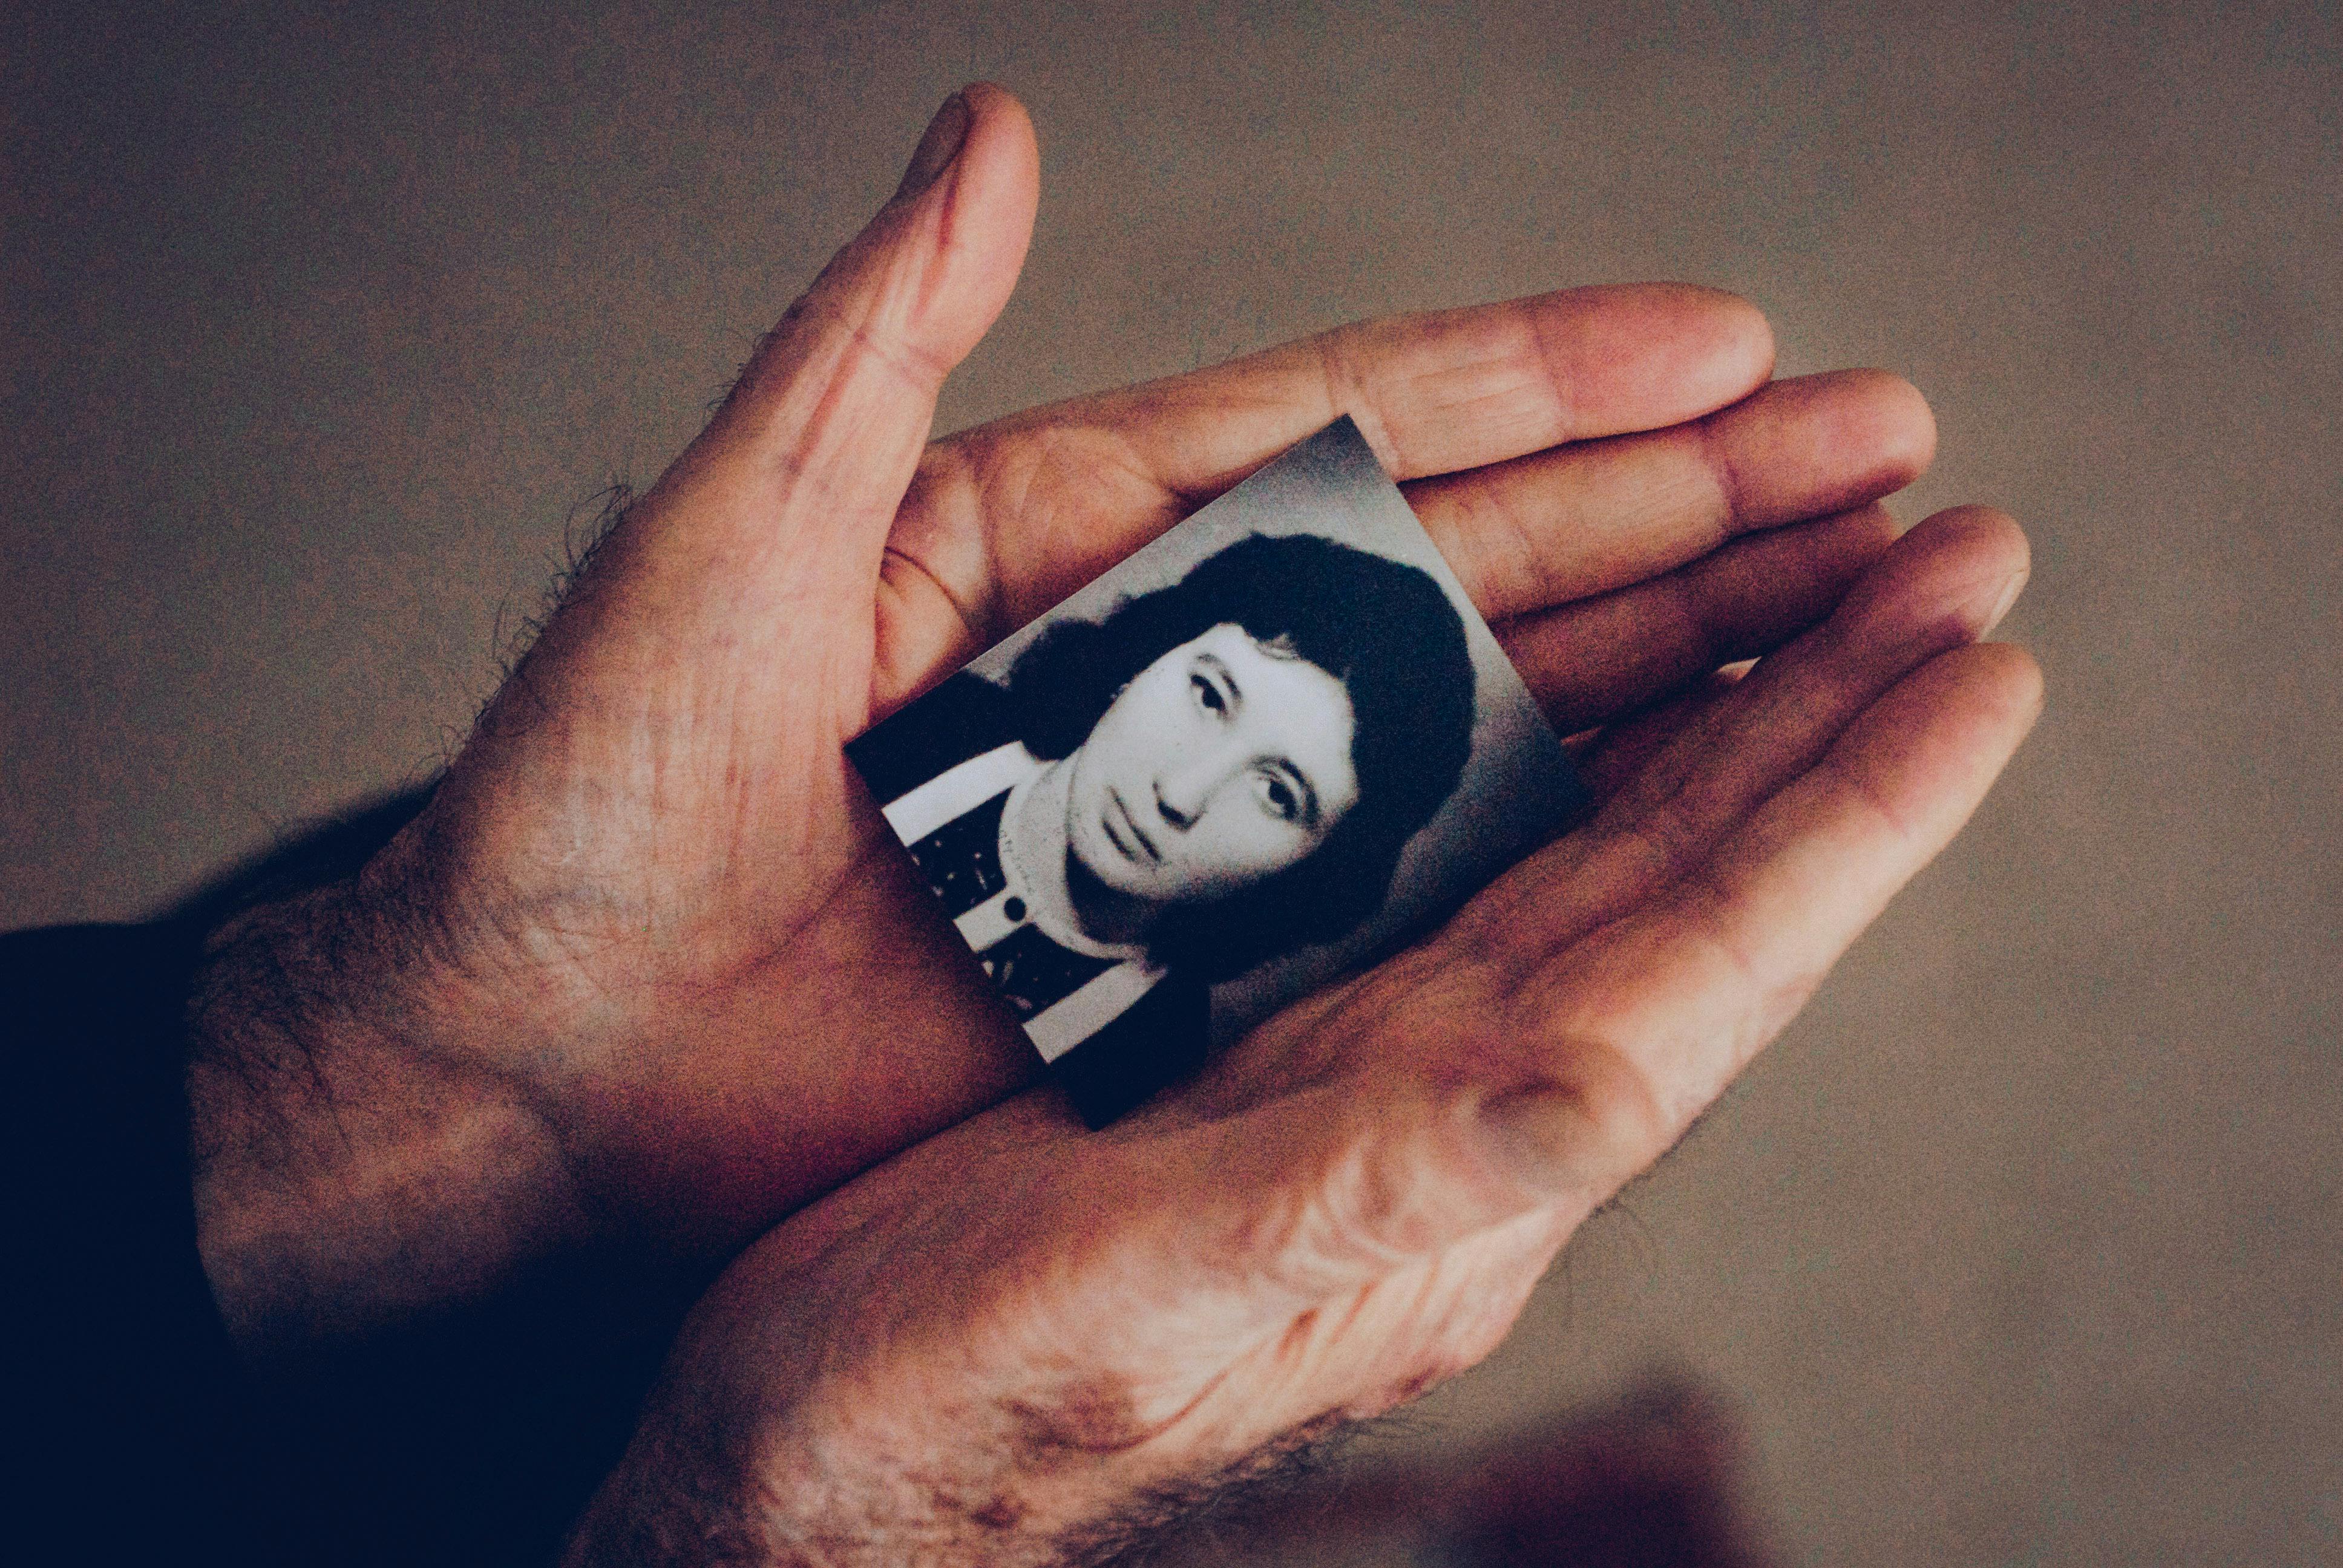 woman s photo on the person s palm